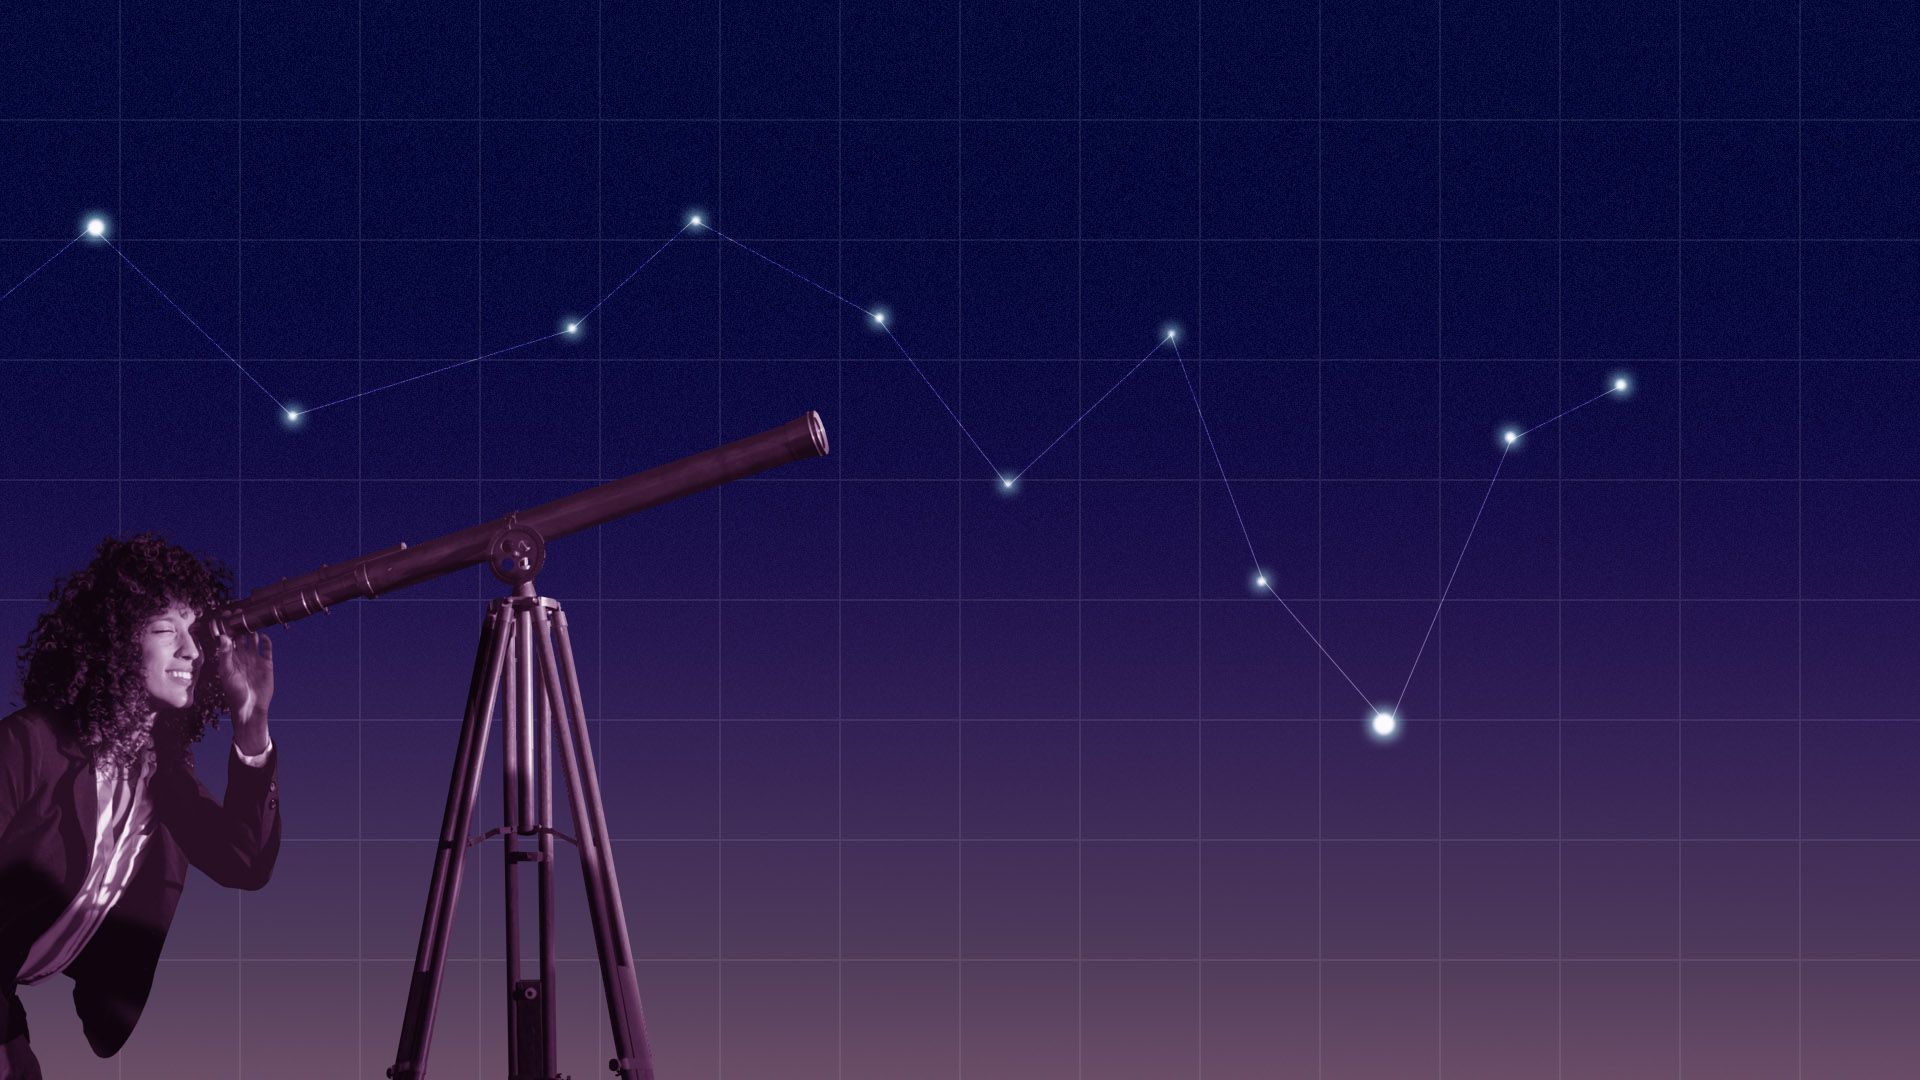 Illustration of a woman looking though a telescope at a night sky with a grid and a trend line made out of stars